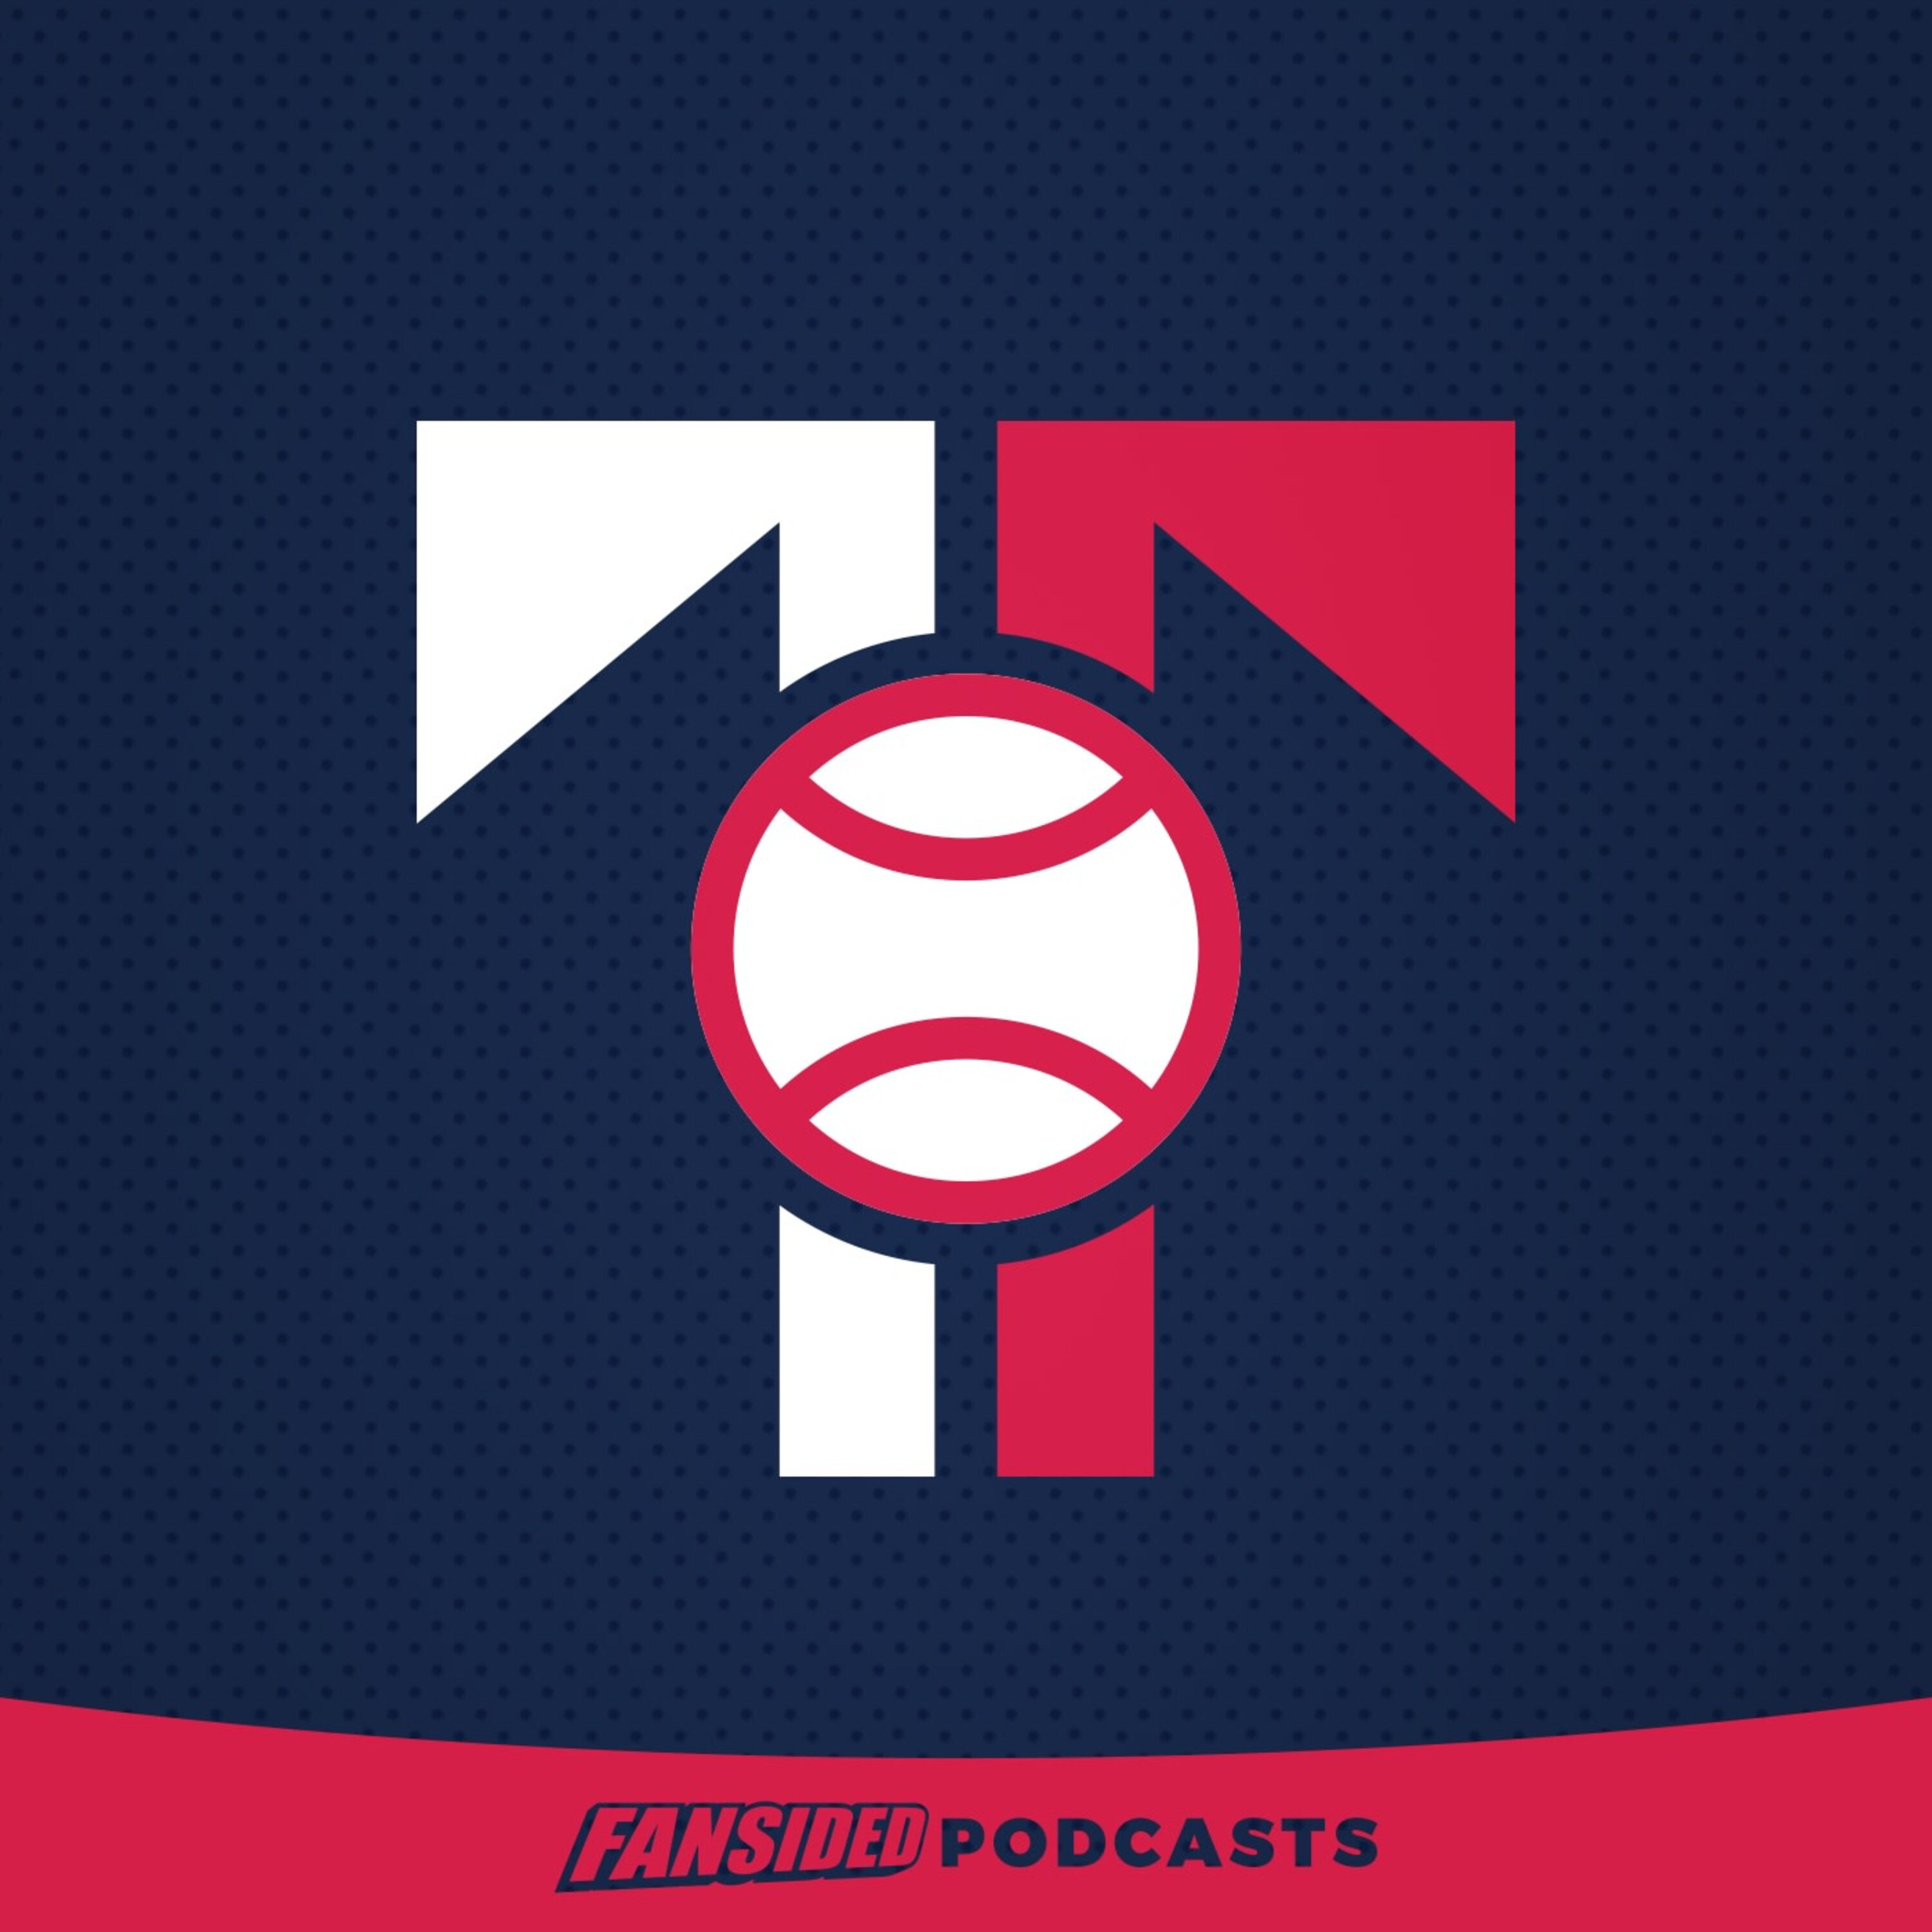 S2E18: On the Atlanta Braves and Marcell Ozuna